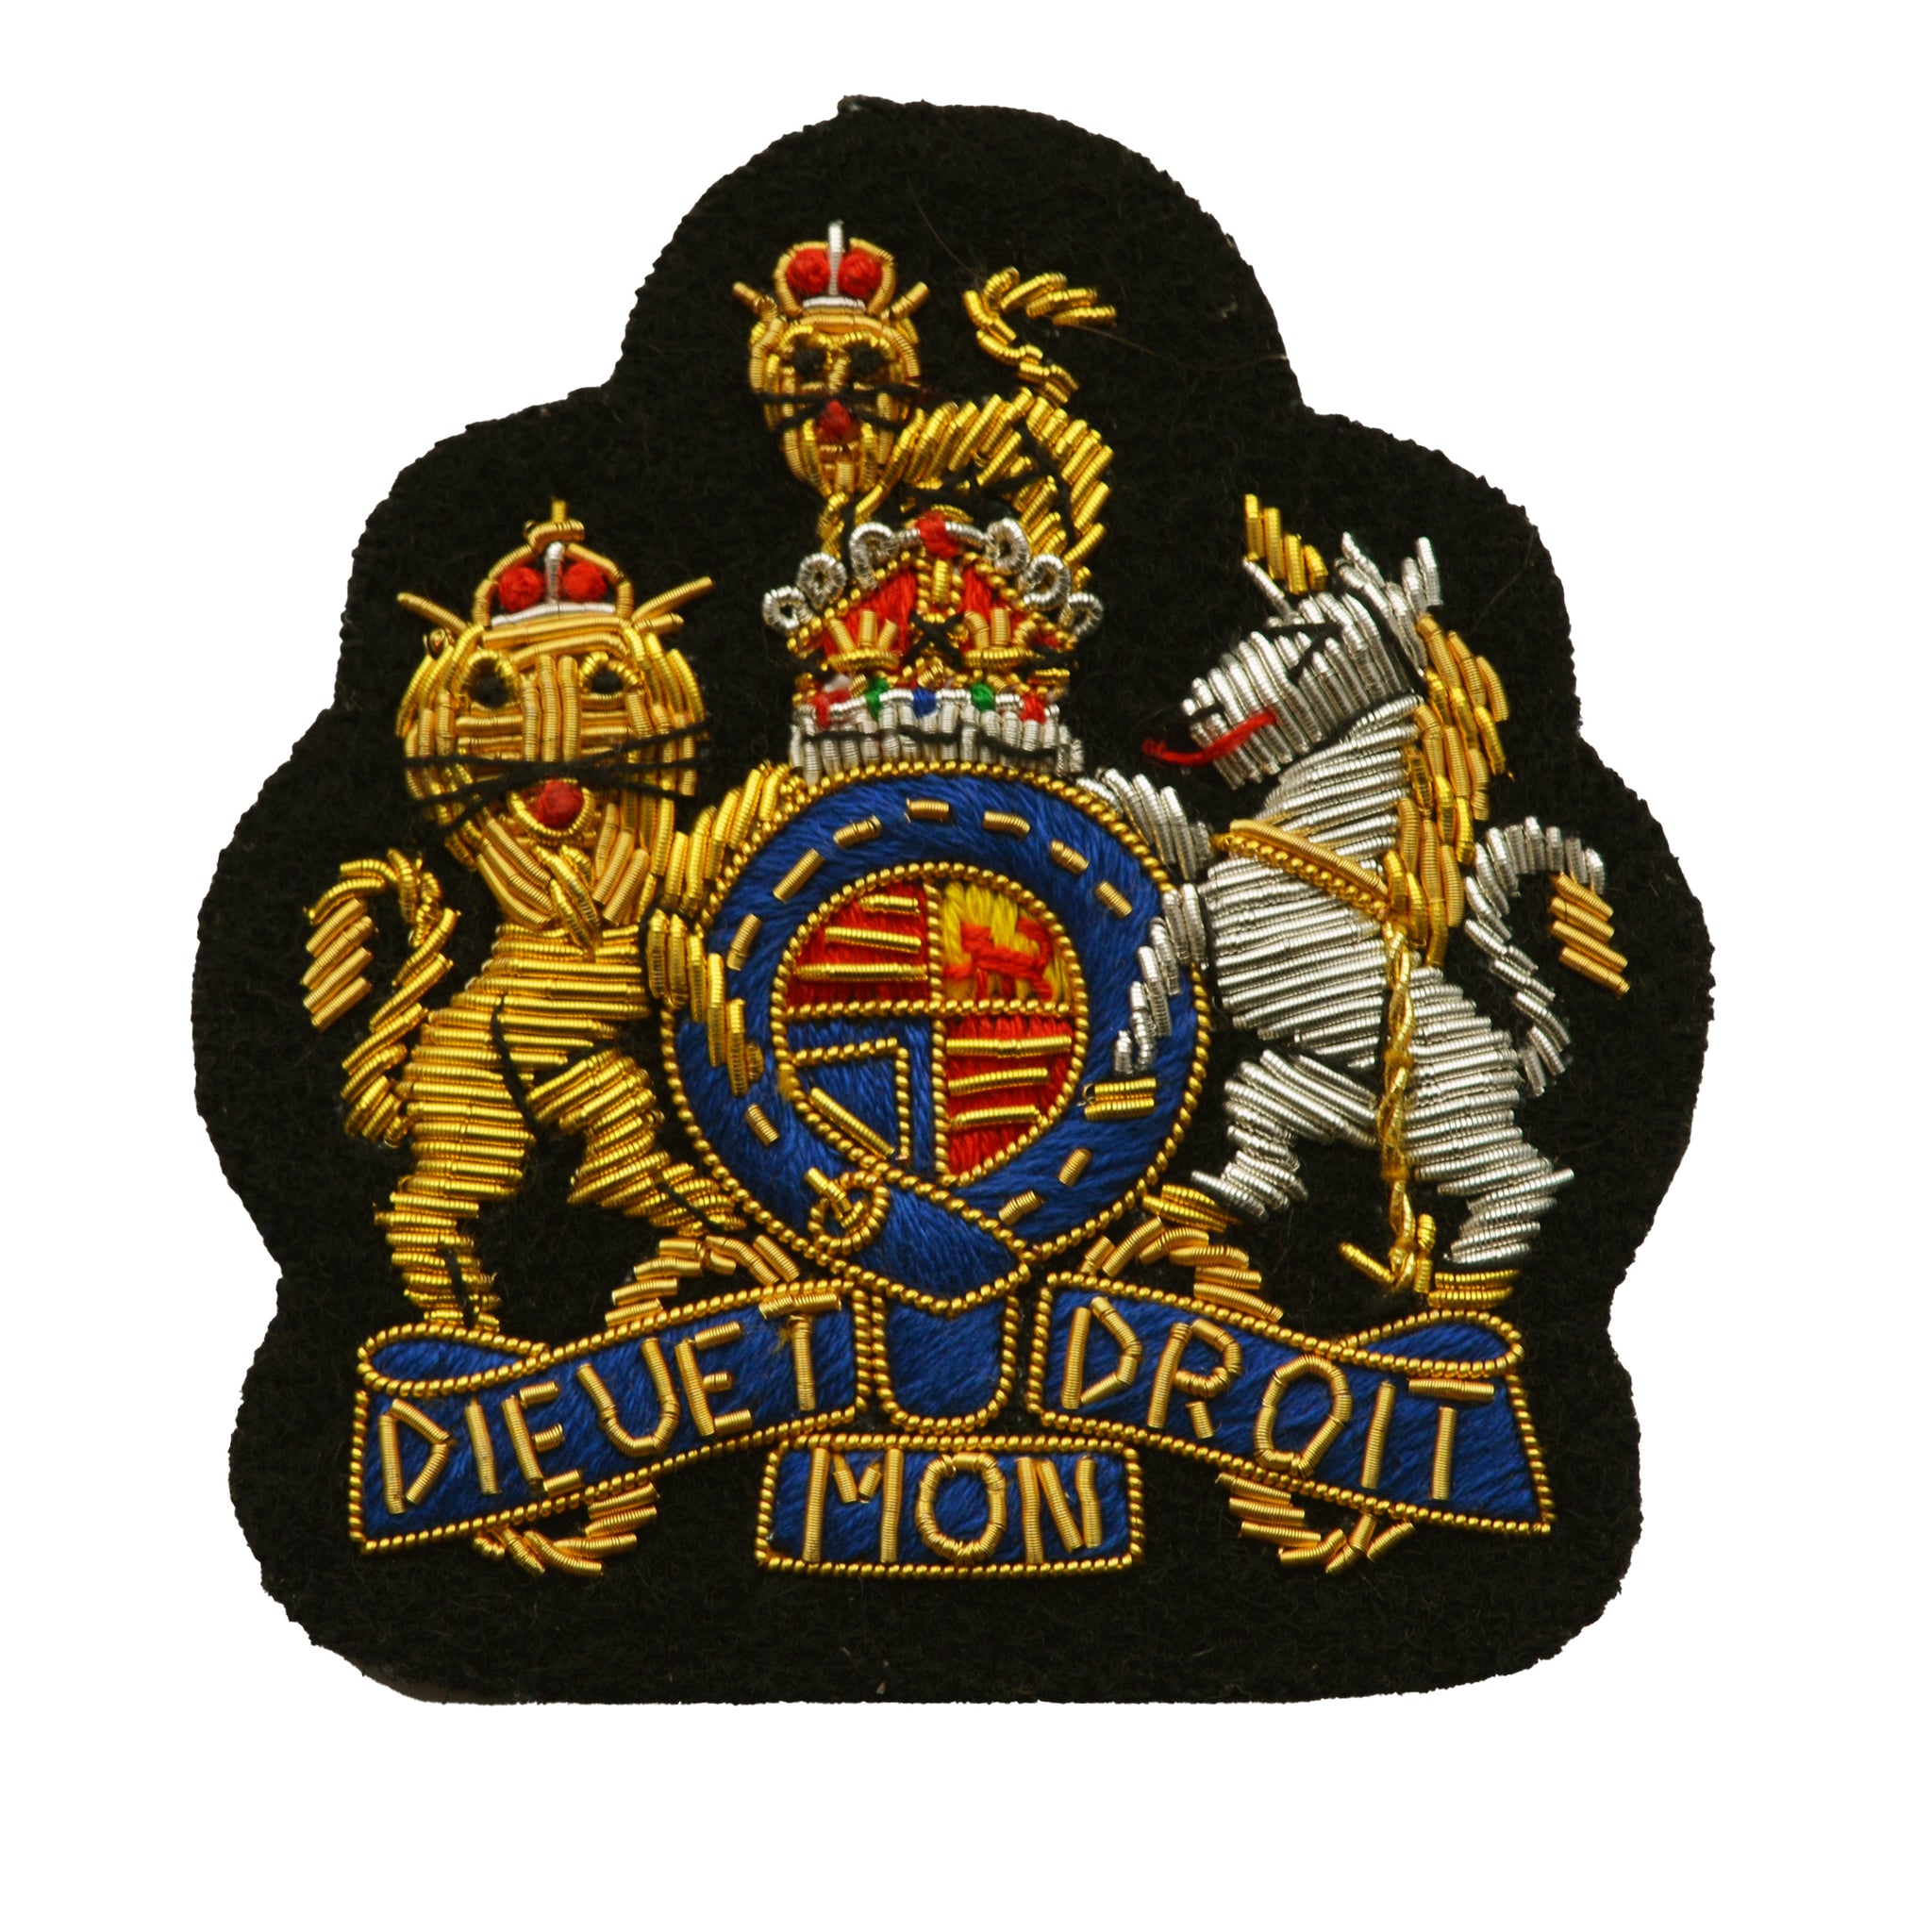 (Kings Crown) Warrant Officer Class 1 (WO1) Royal Tank Regiment (RTR) Royal Arms Rank Badge British Army Badge